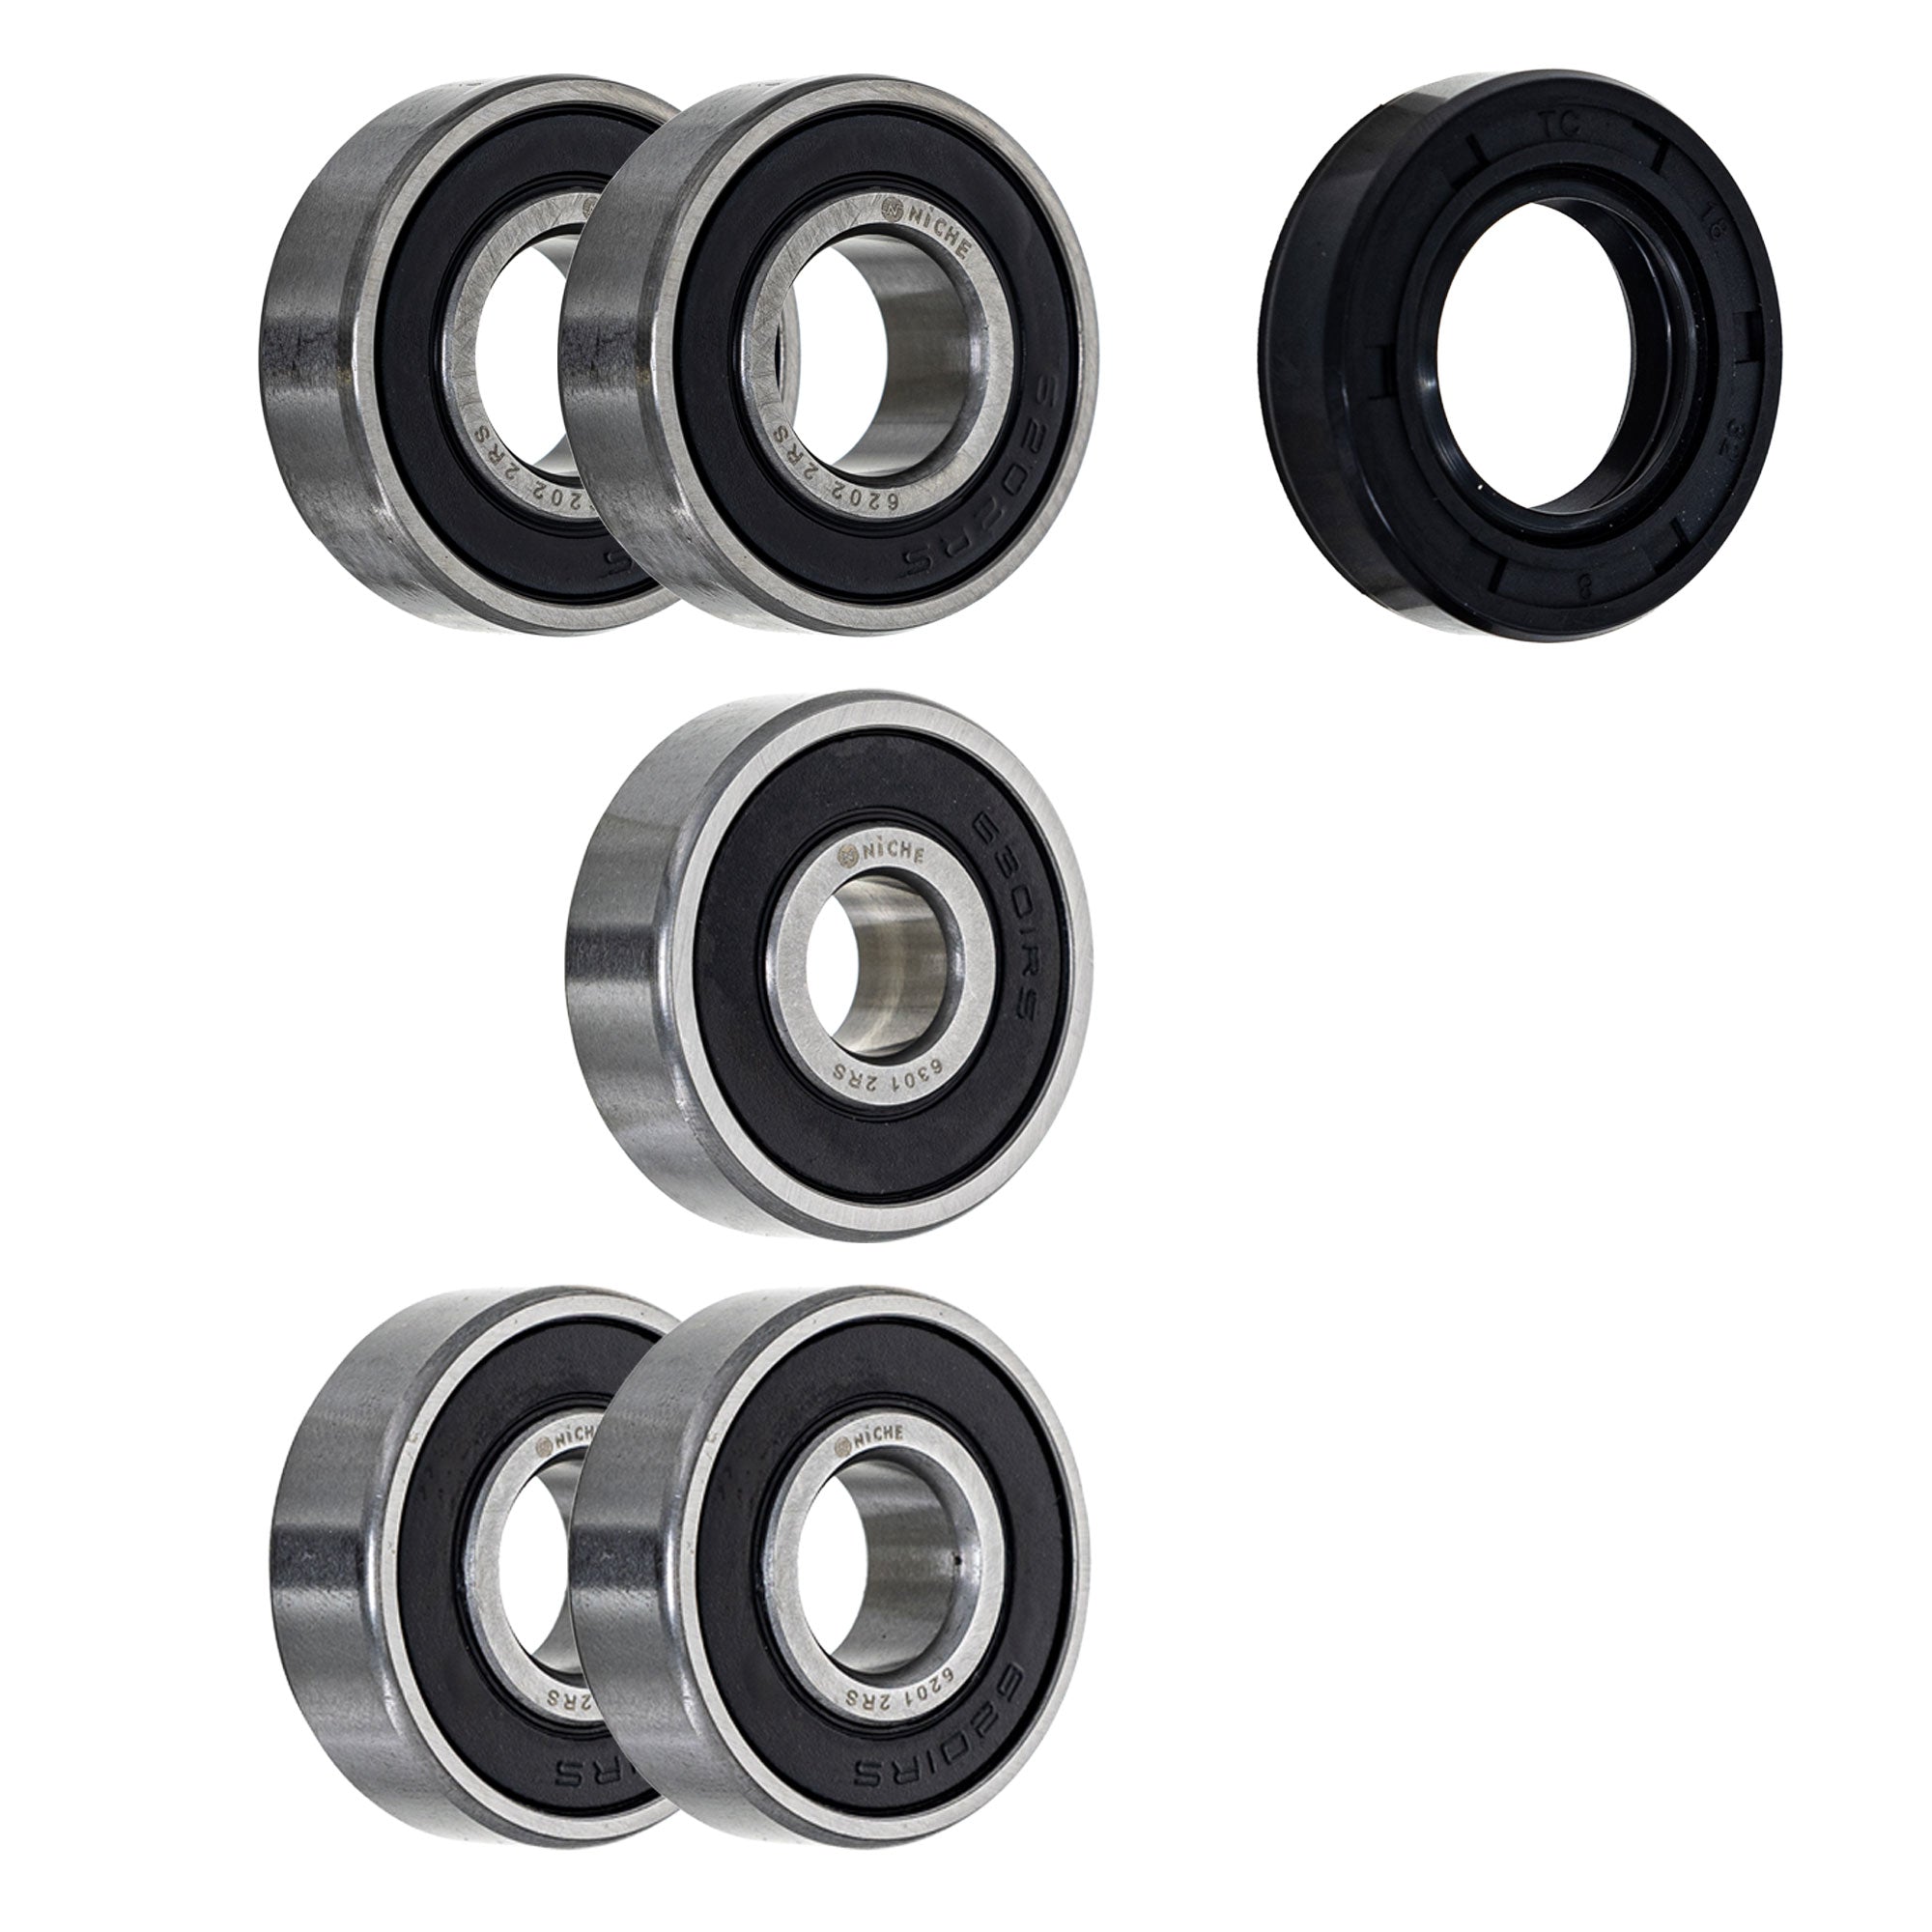 Wheel Bearing Seal Kit for zOTHER Ref No RS175 RM400 RM250 RM125 NICHE MK1008690